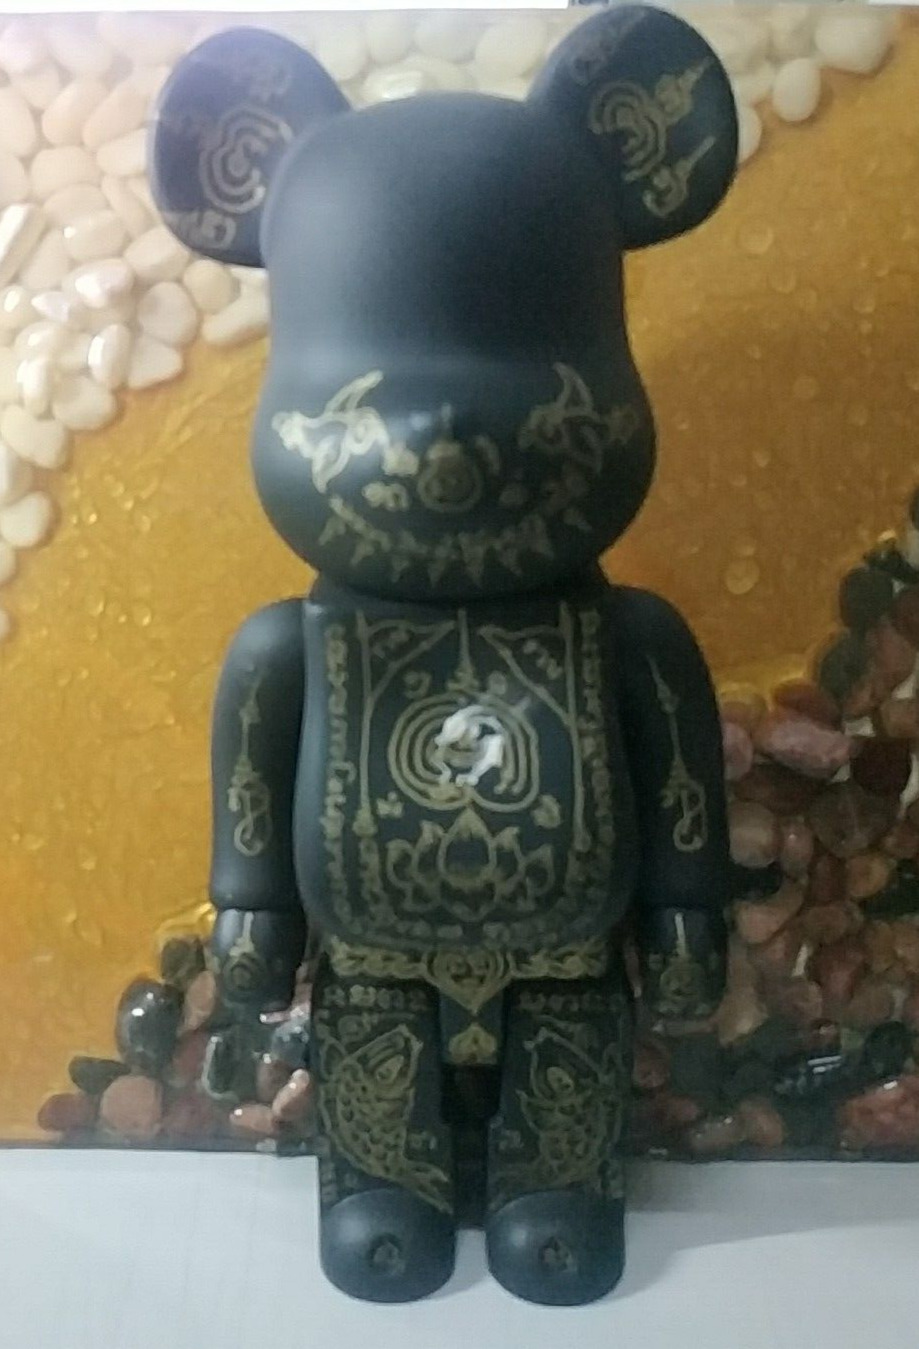 BEARBRICK 400 WITH SPECIAL YANT FOR WEALTH PROTECTION AND IMPROVE RELATIONSHIP